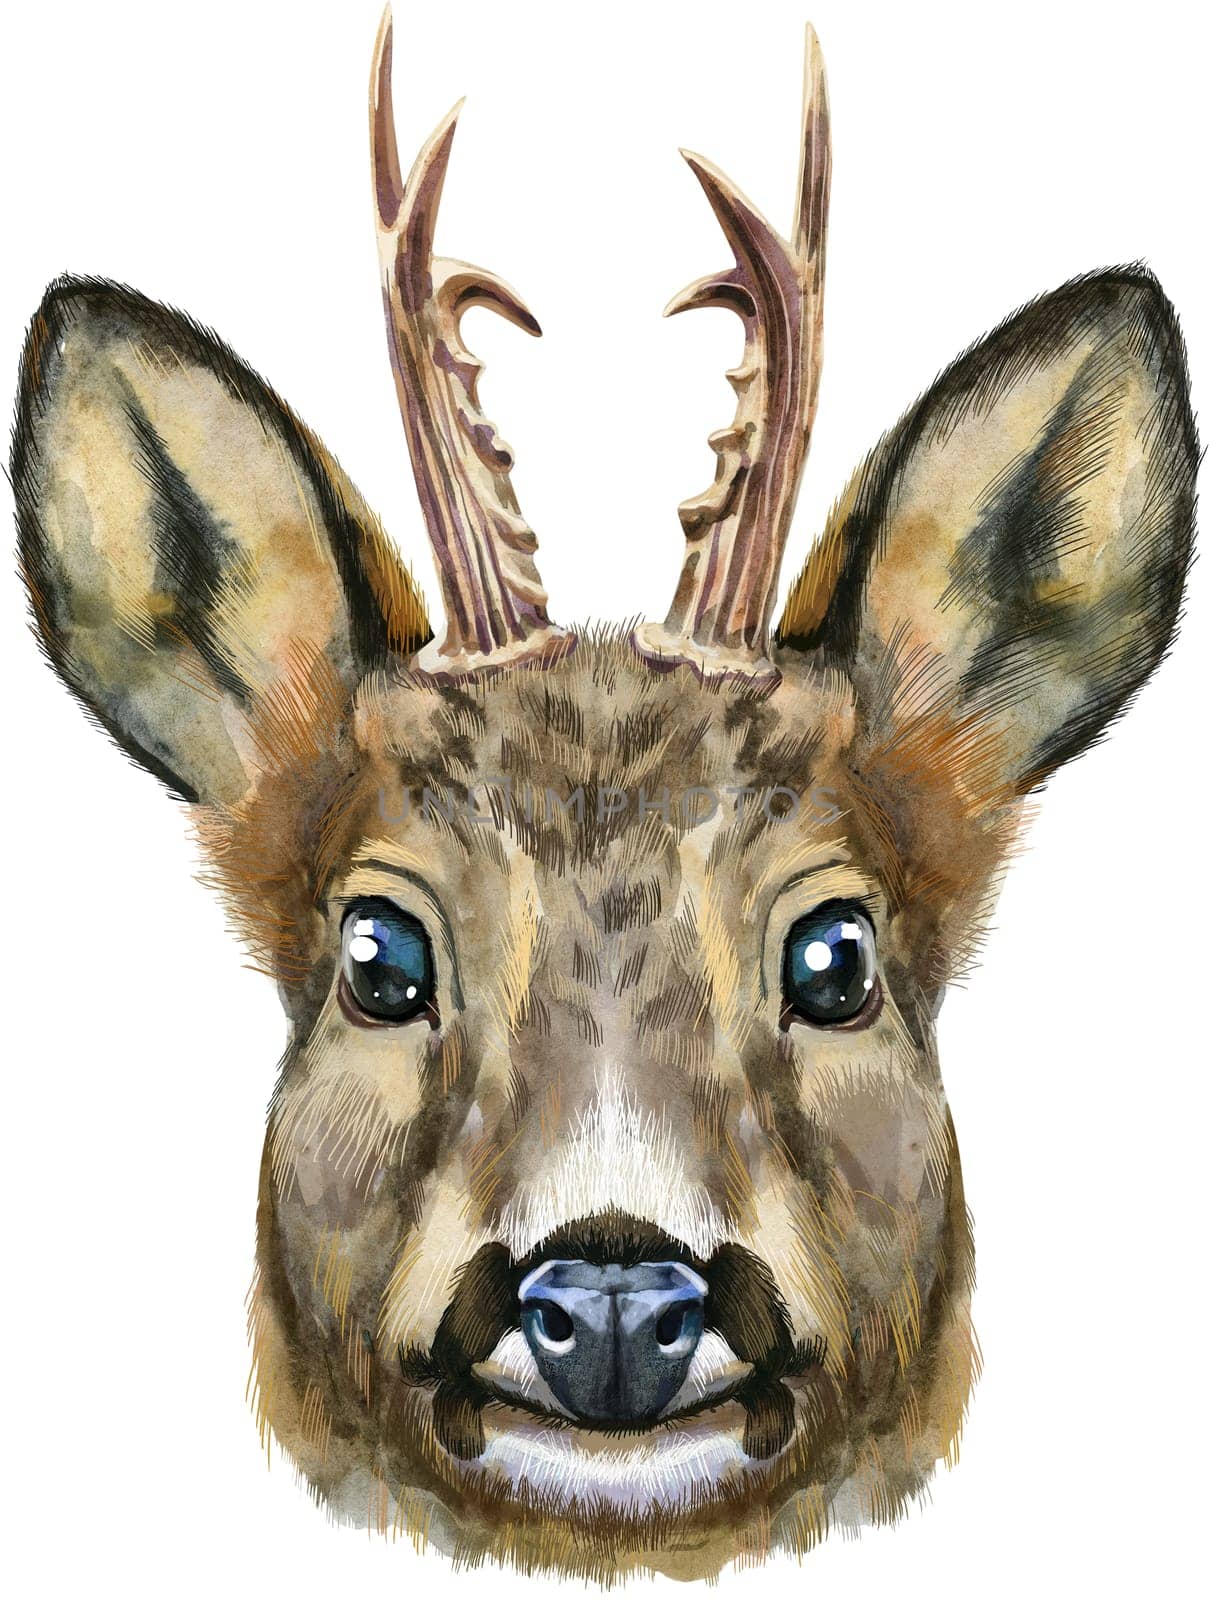 Watercolor portrait of a roe deer on white background by NataOmsk